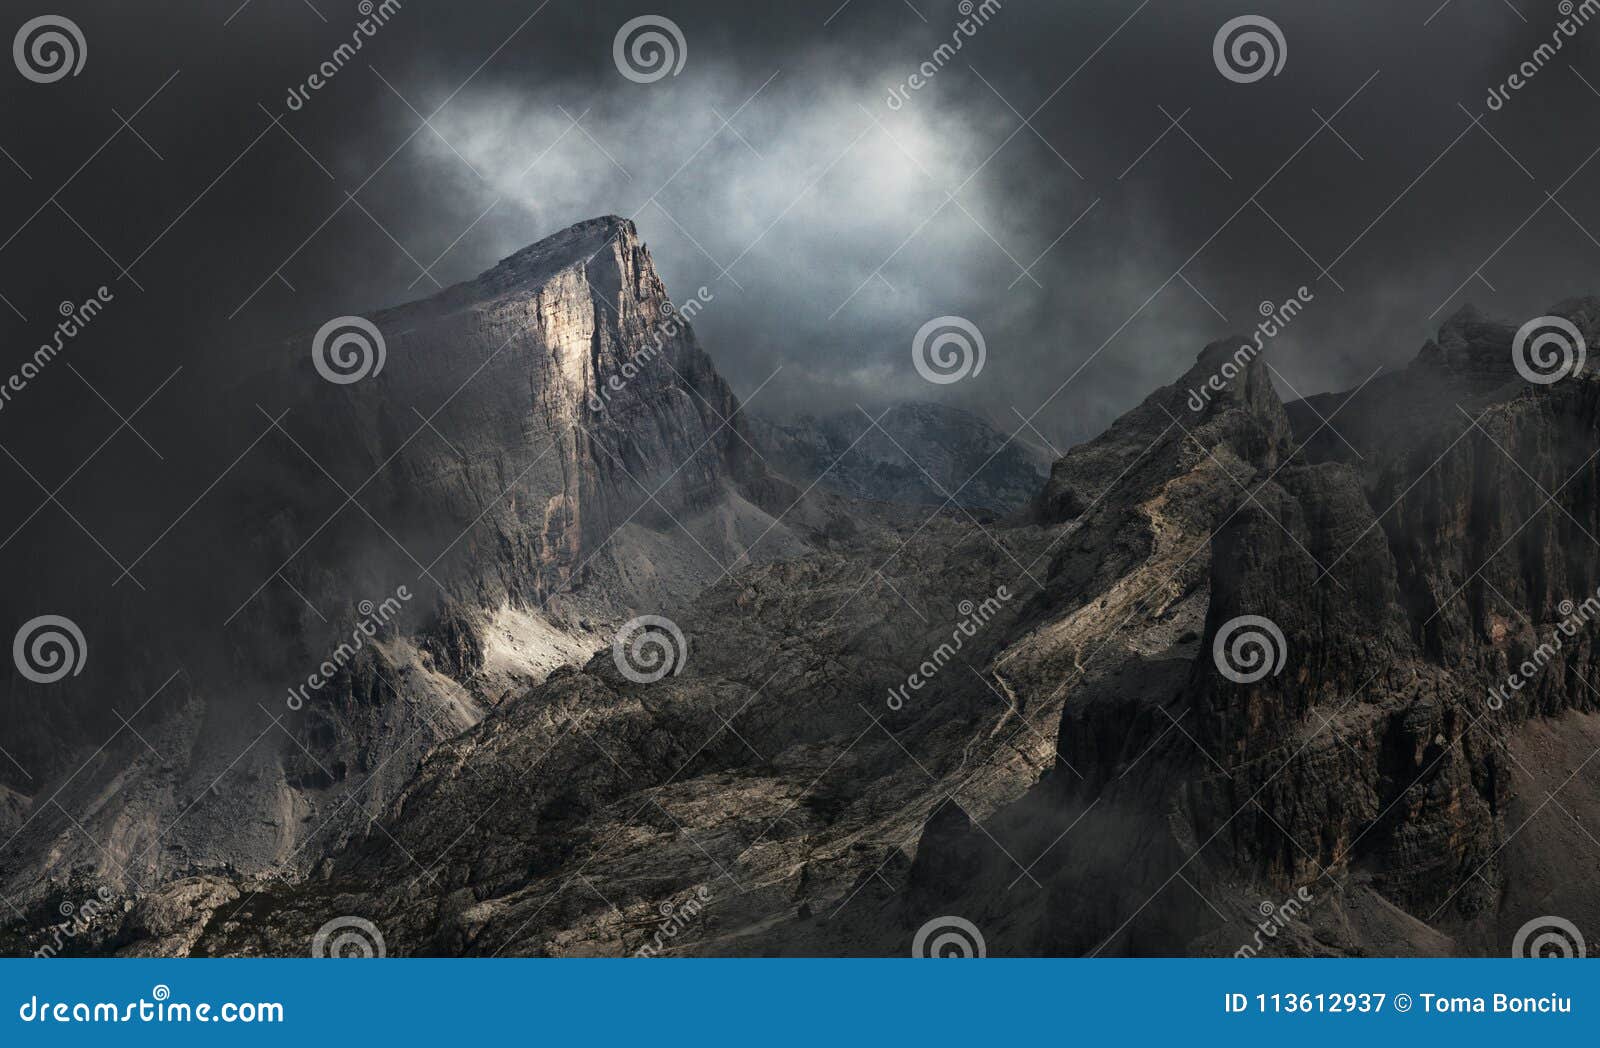 dramatic mountain landscape in fog and mist - dolomite mountains